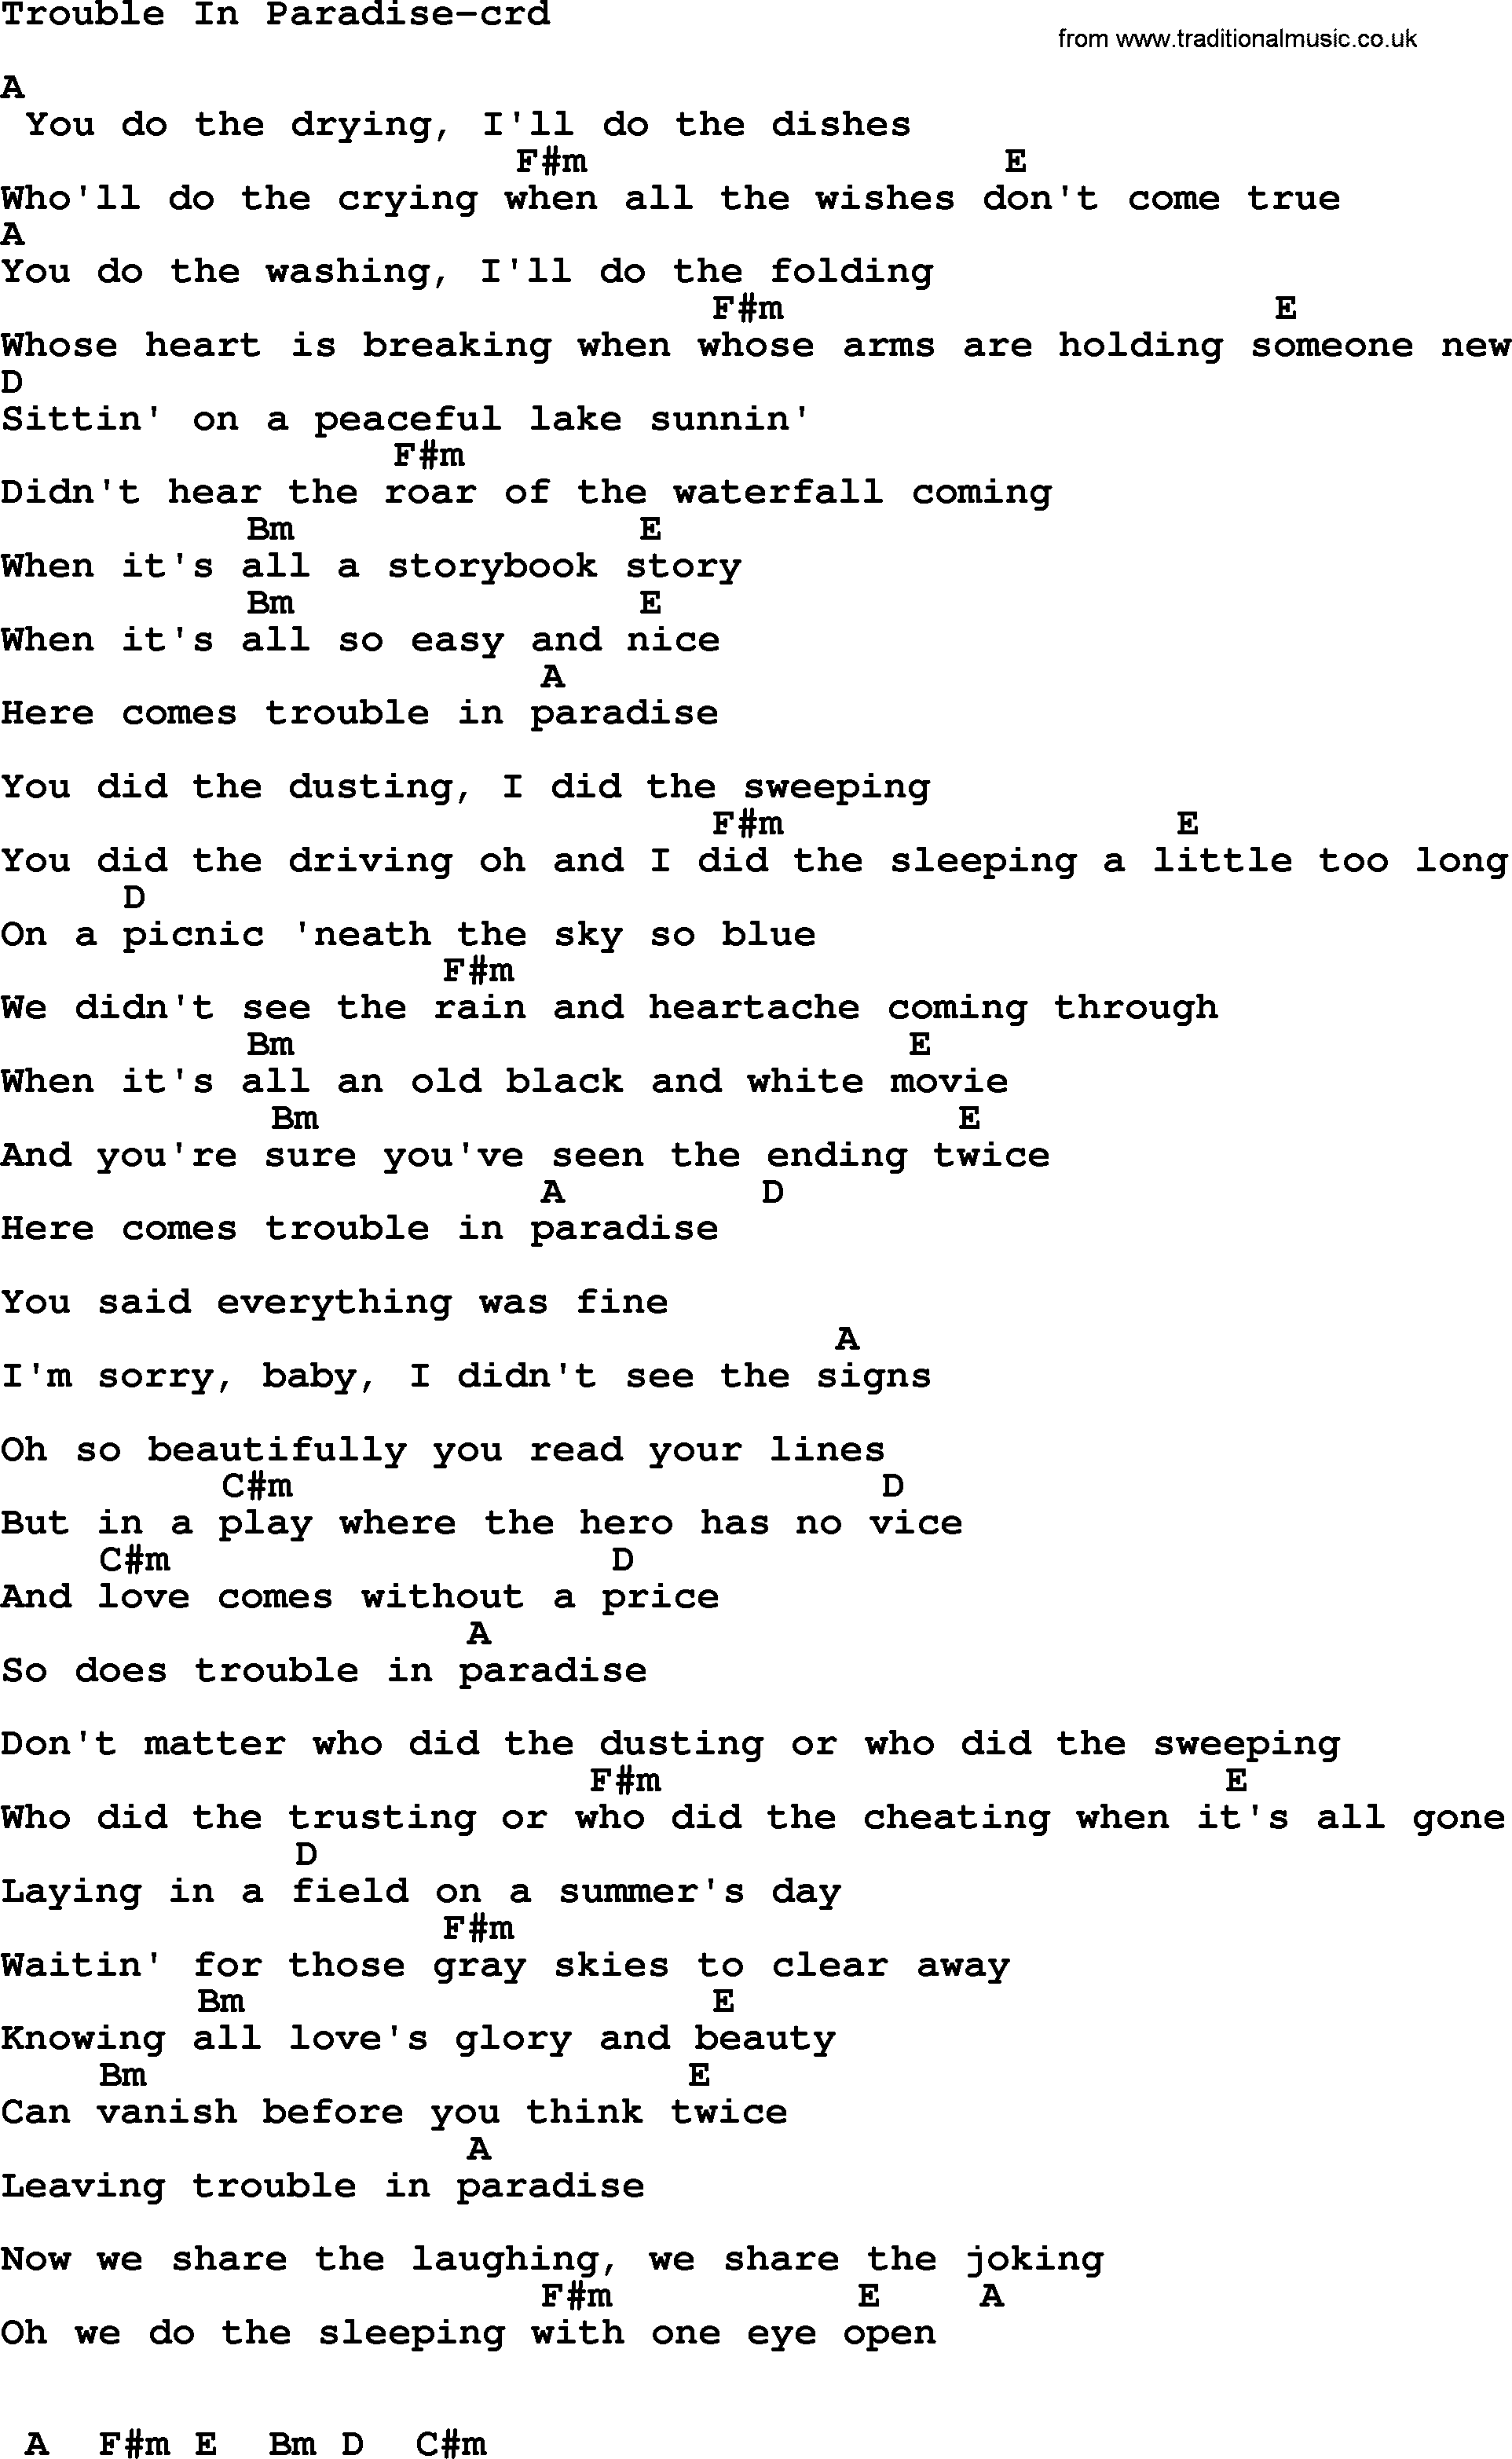 Bruce Springsteen song: Trouble In Paradise, lyrics and chords